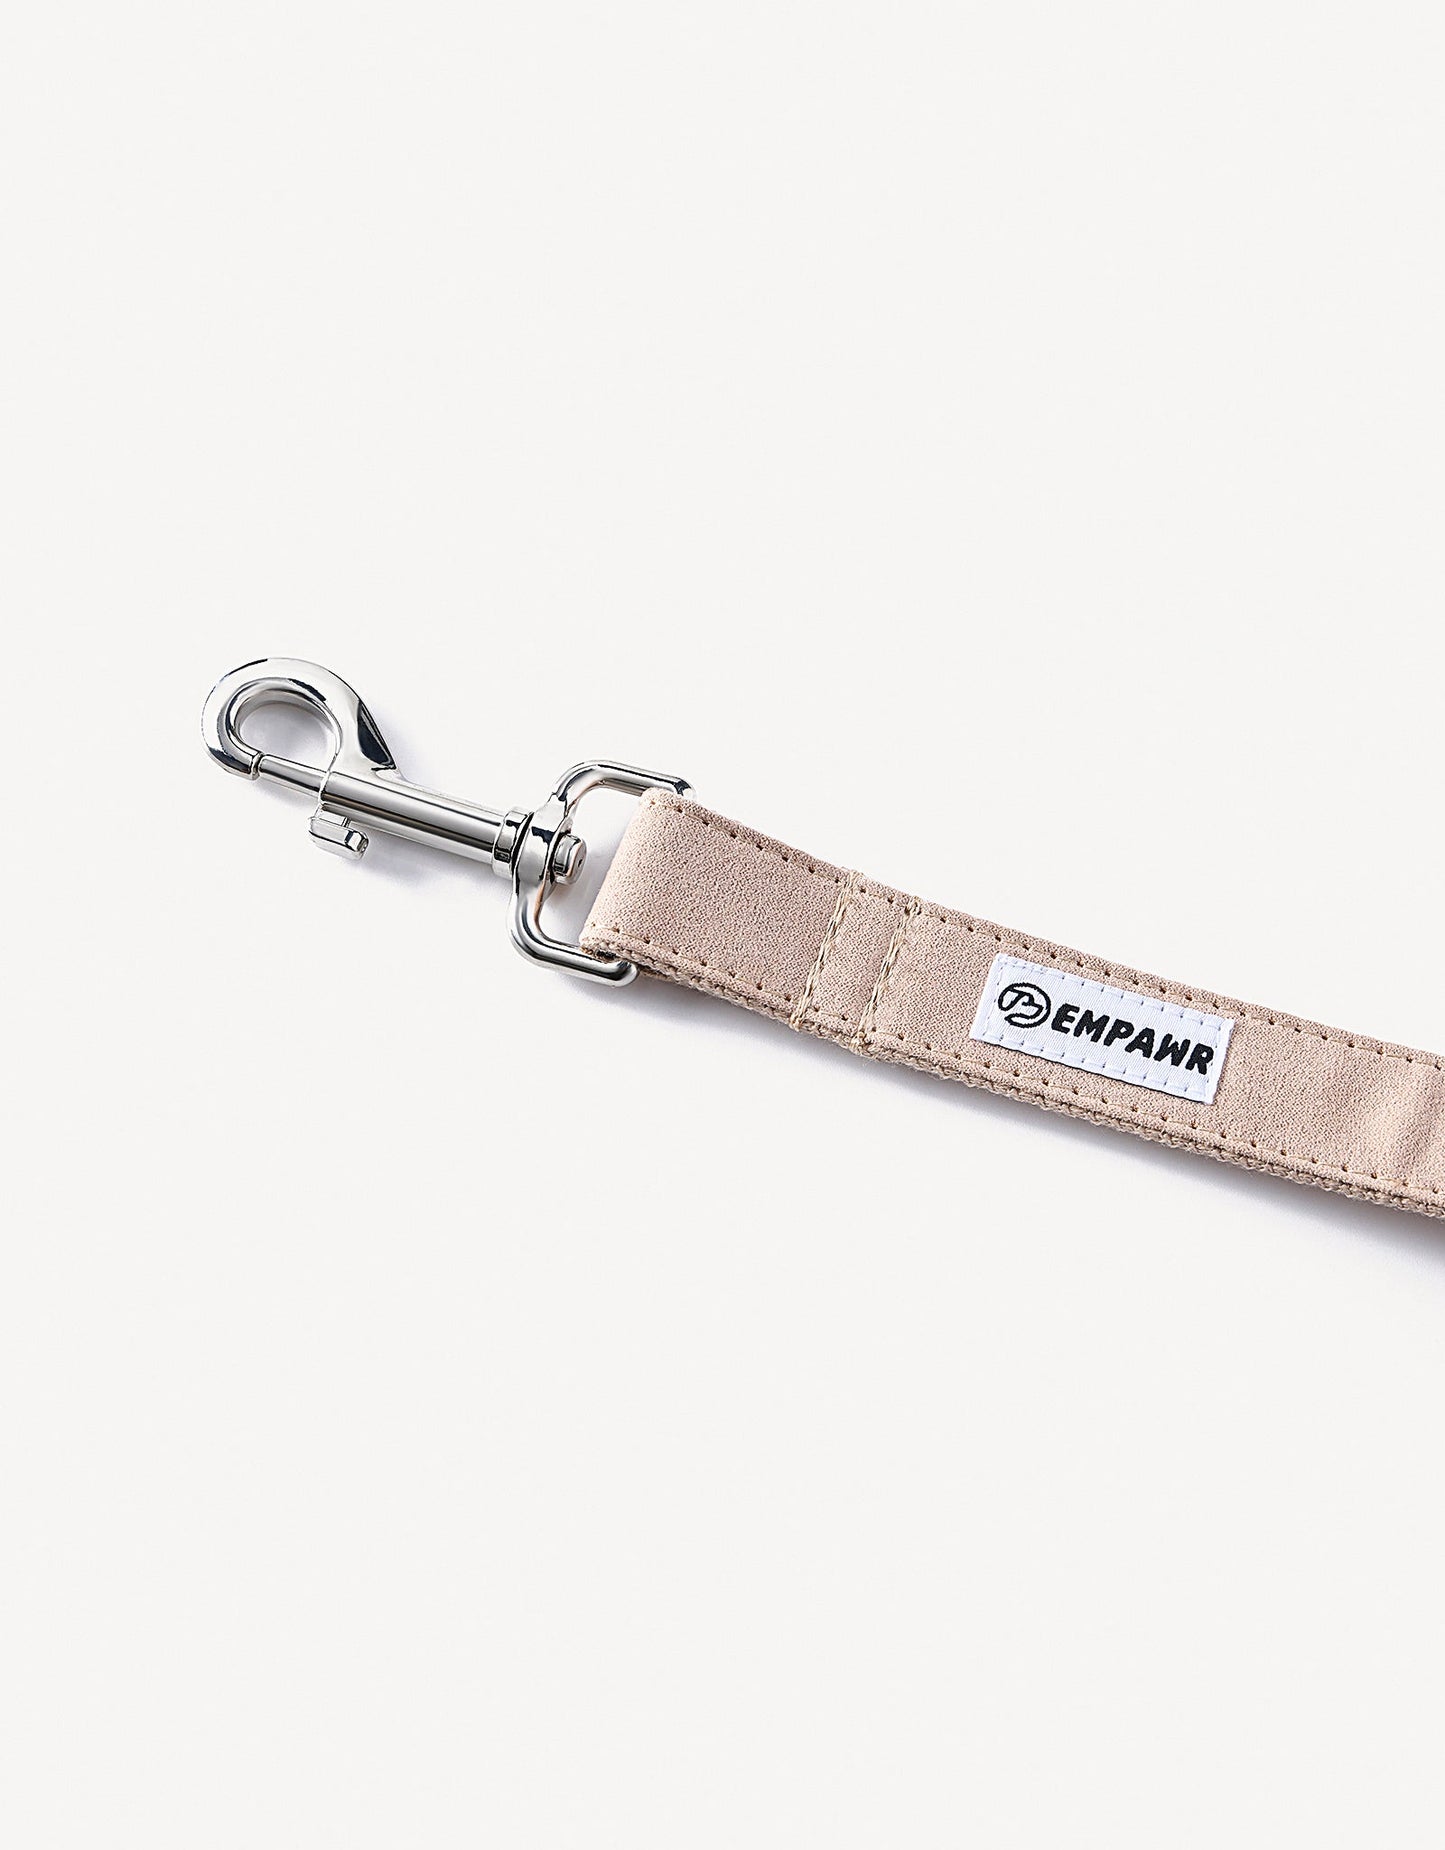 Royal Luxe Dog Leash - Pearl White